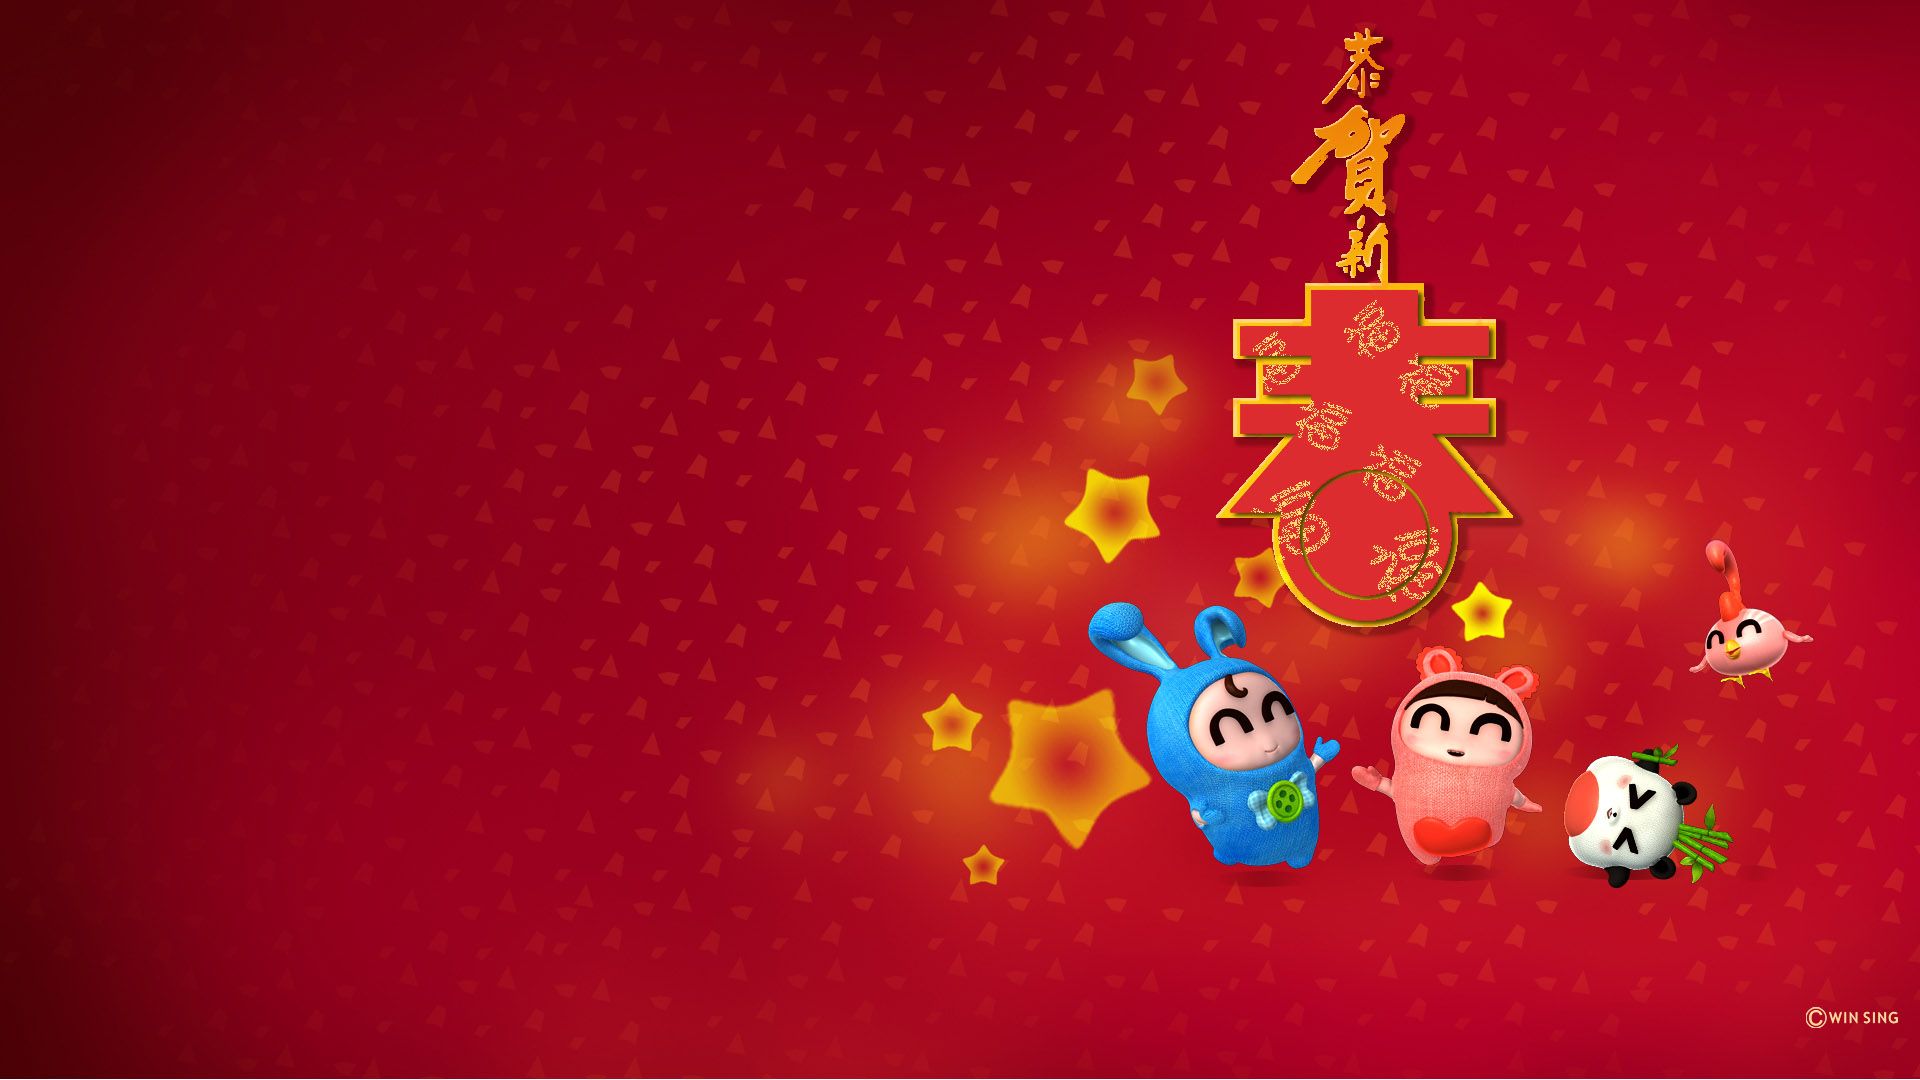 Chinese New Year 2014 Free Desktop Wallpapers   Wallpaper High